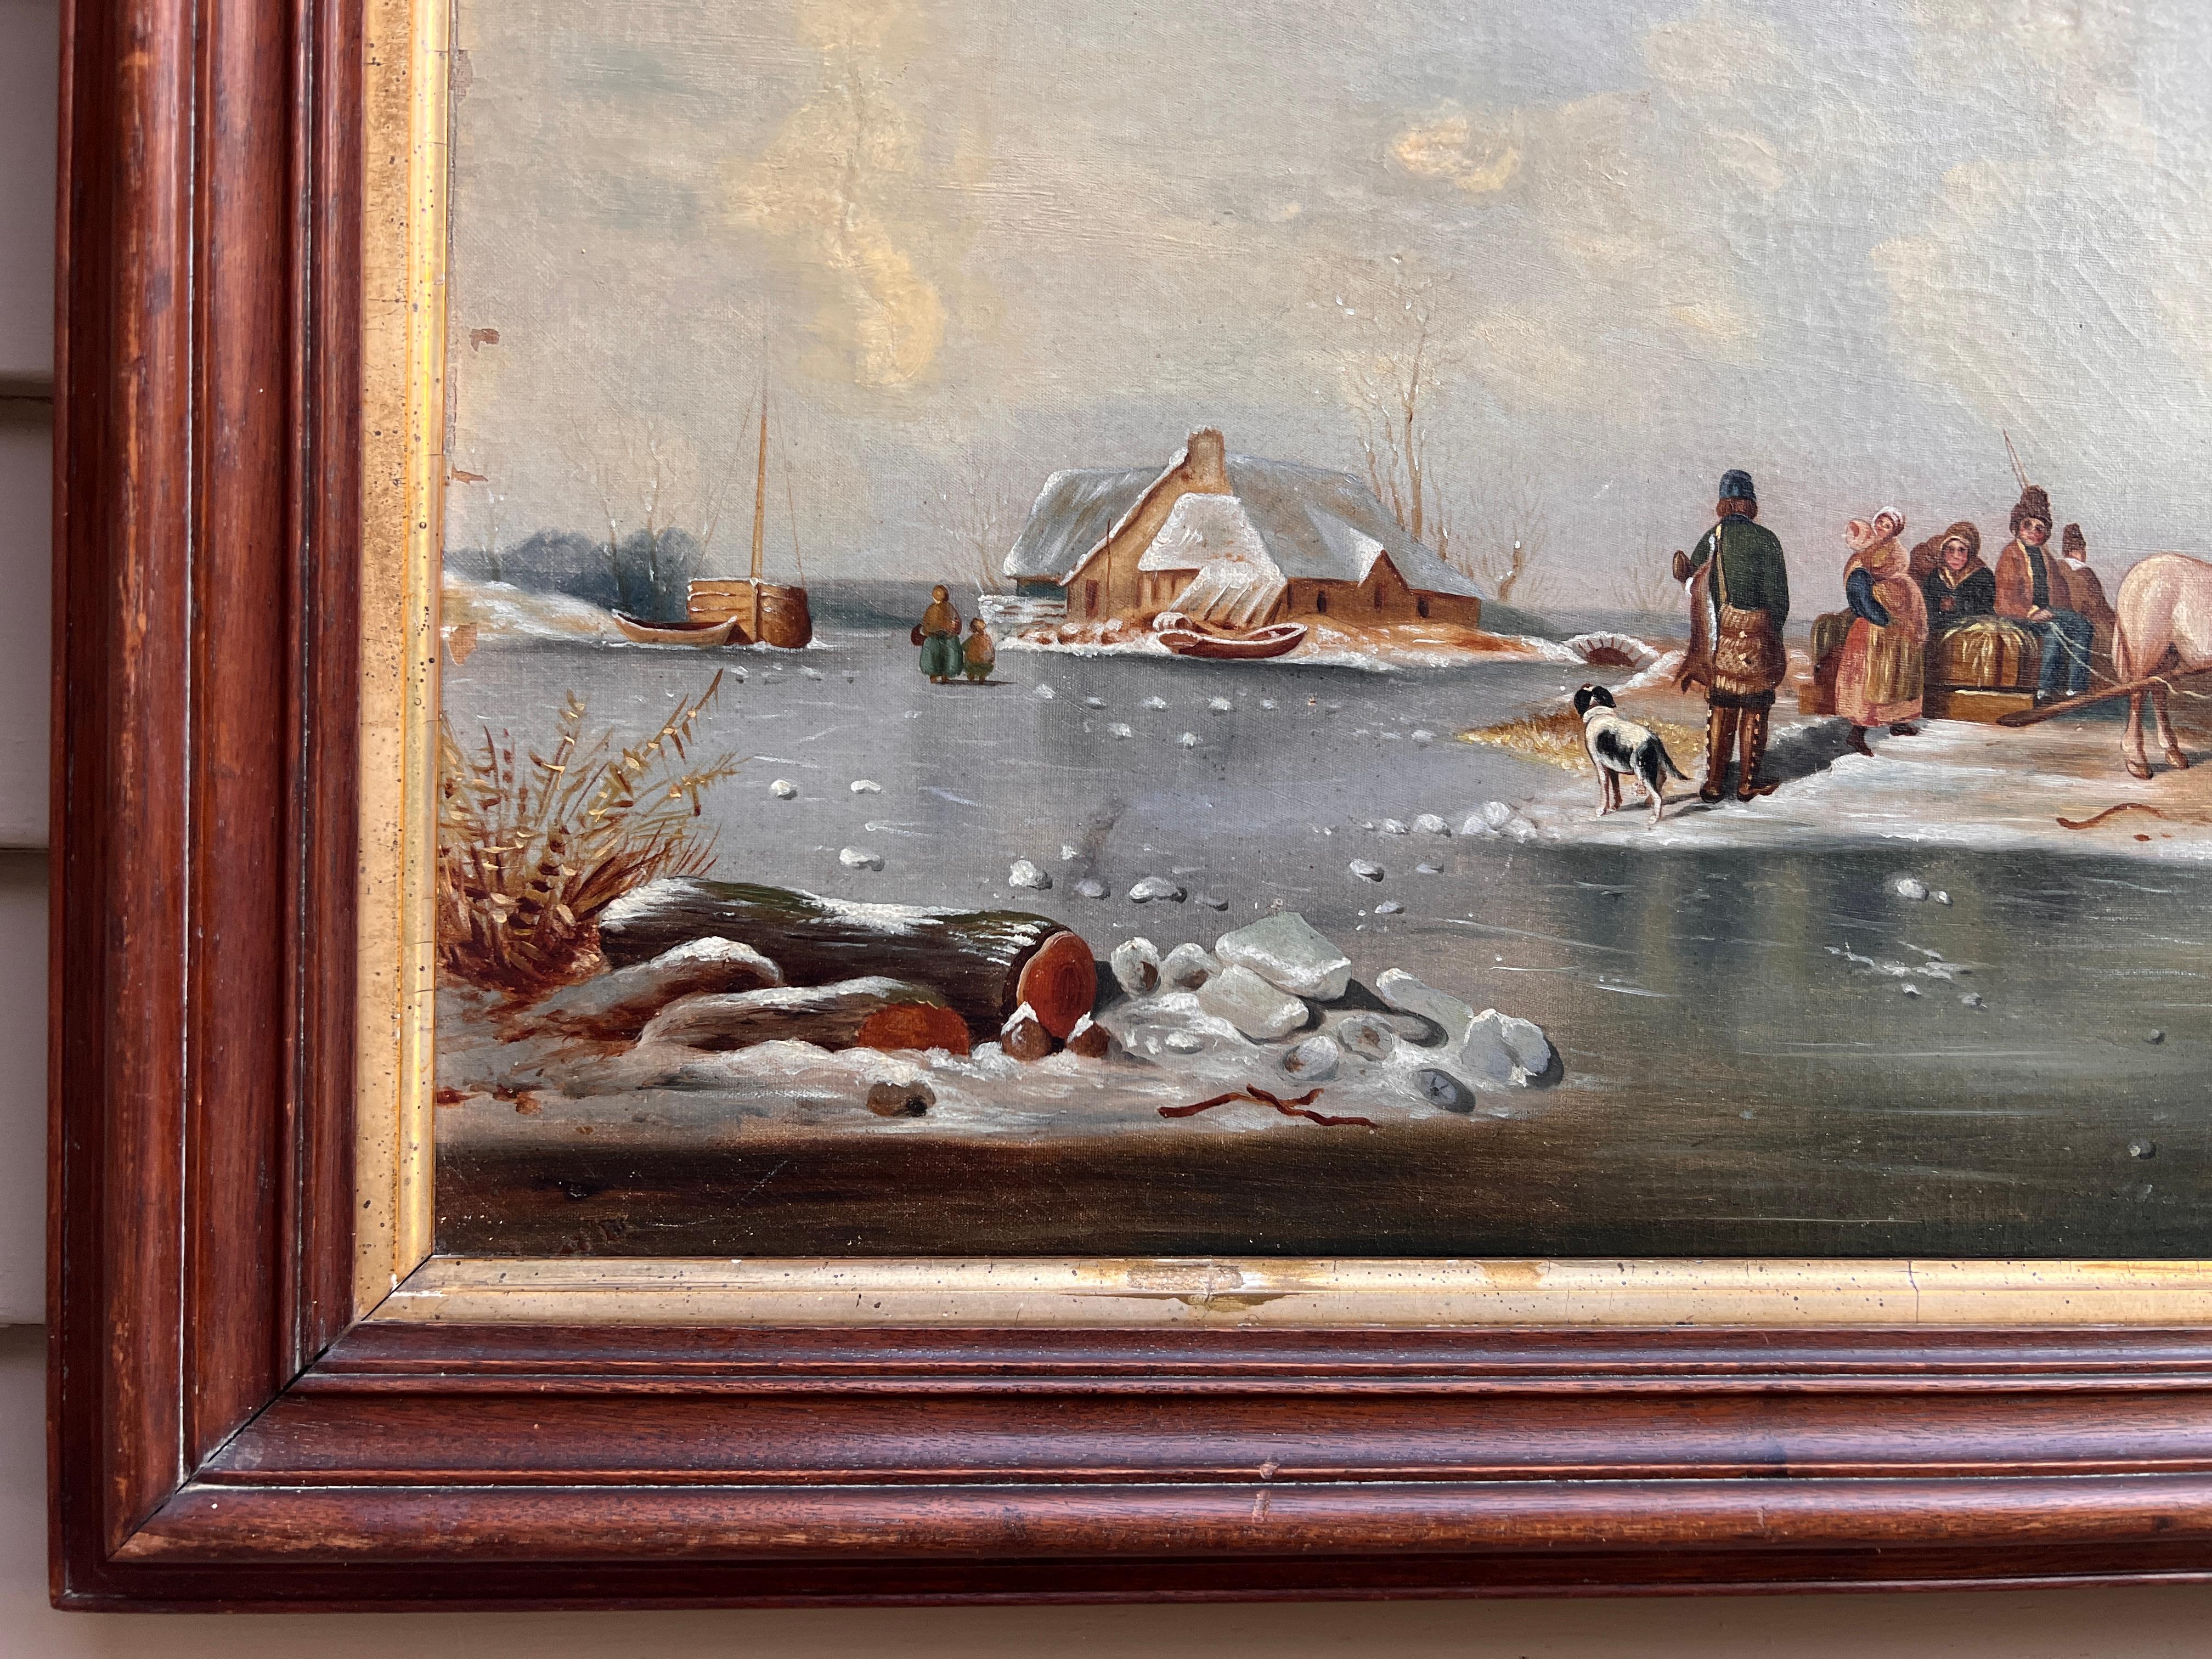 Antique oil painting on canvas, Winter Landscape, Village, figures. Framed - Impressionist Painting by Unknown